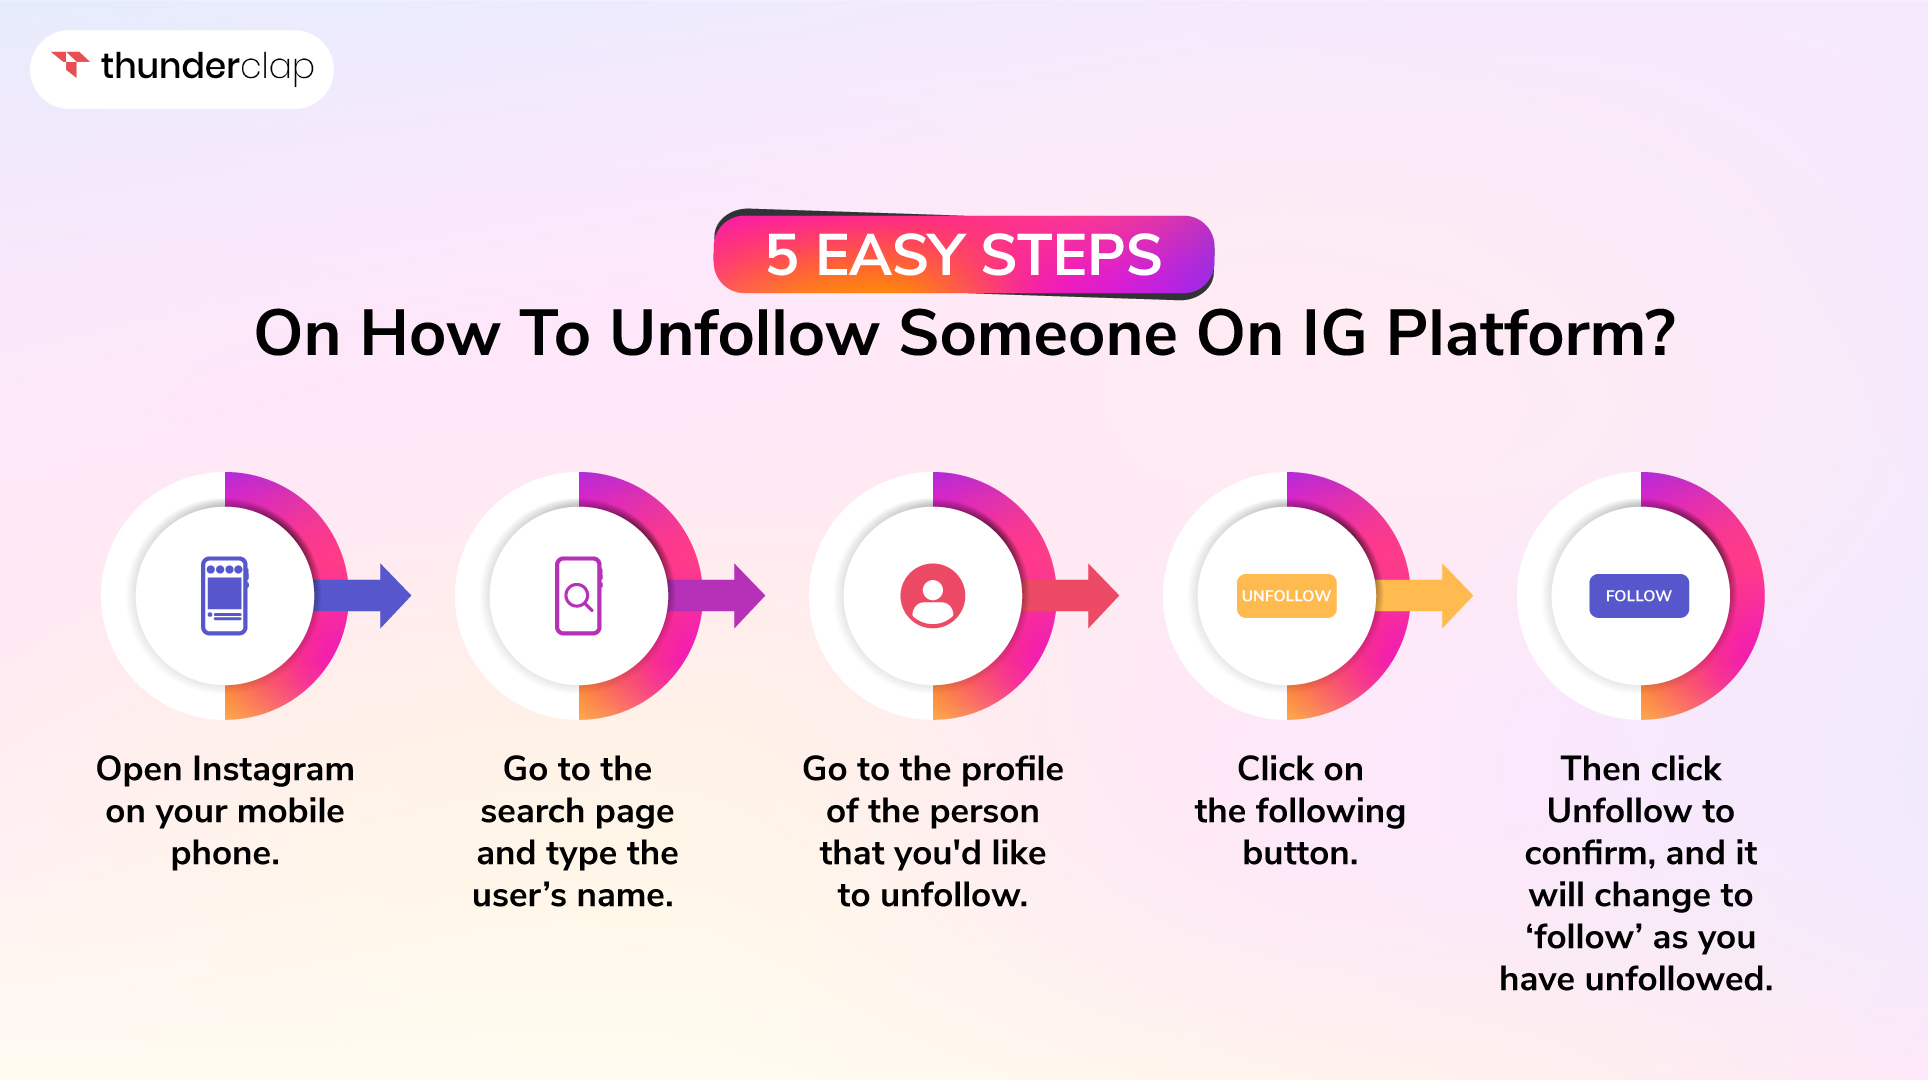 5 Easy Steps on How To Unfollow Someone On IG Platform